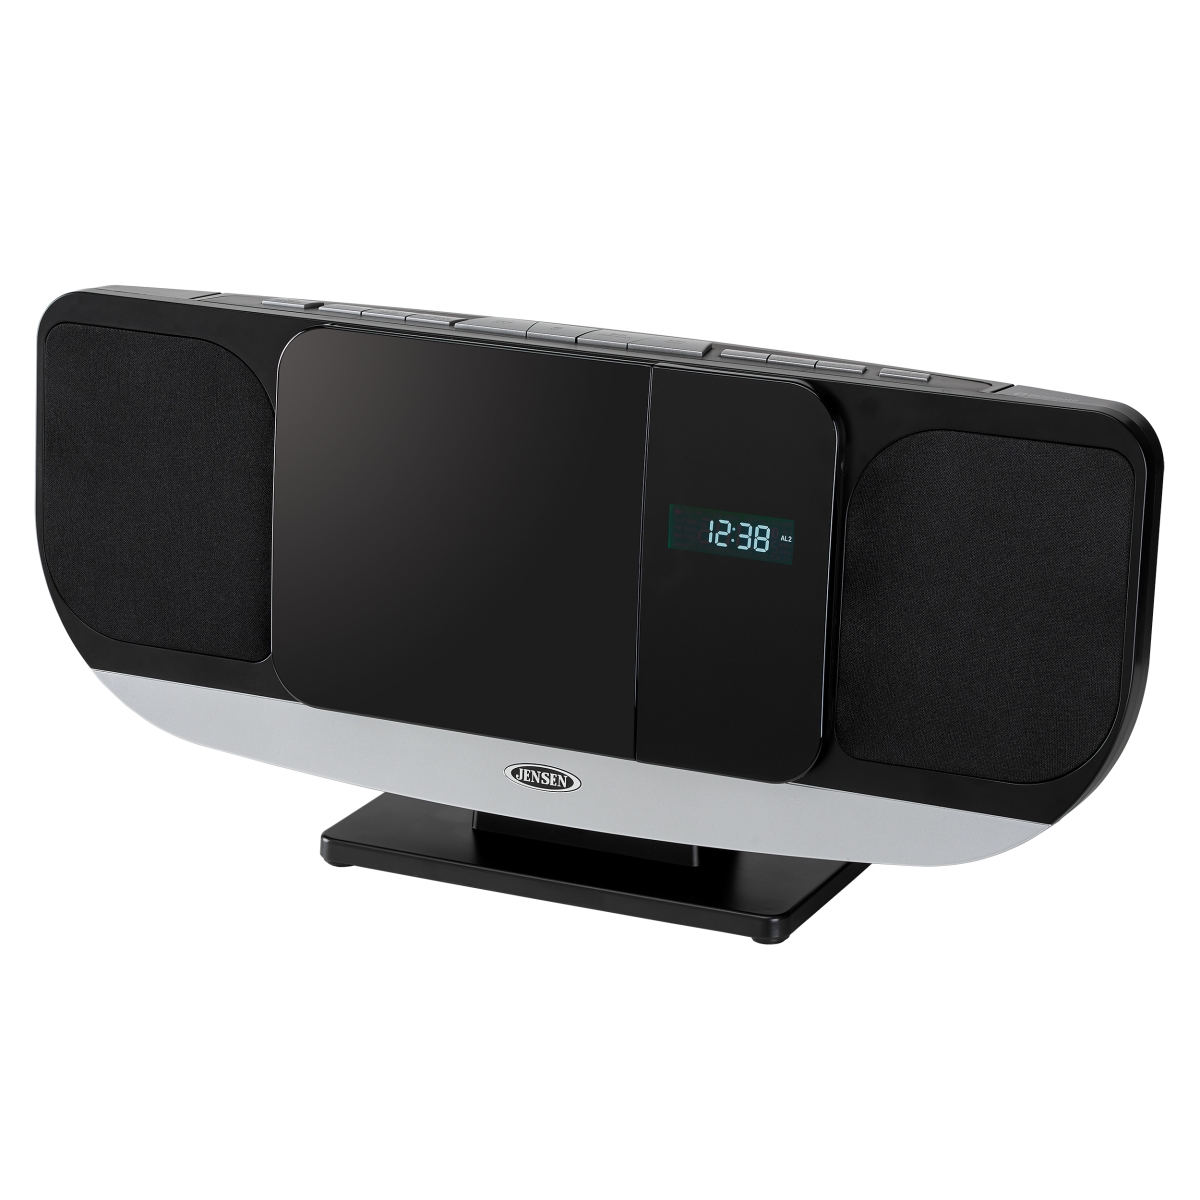 Picture of Jensen JBS-215 Wall Mountable Bluetooth Music System with MP3 CD Player